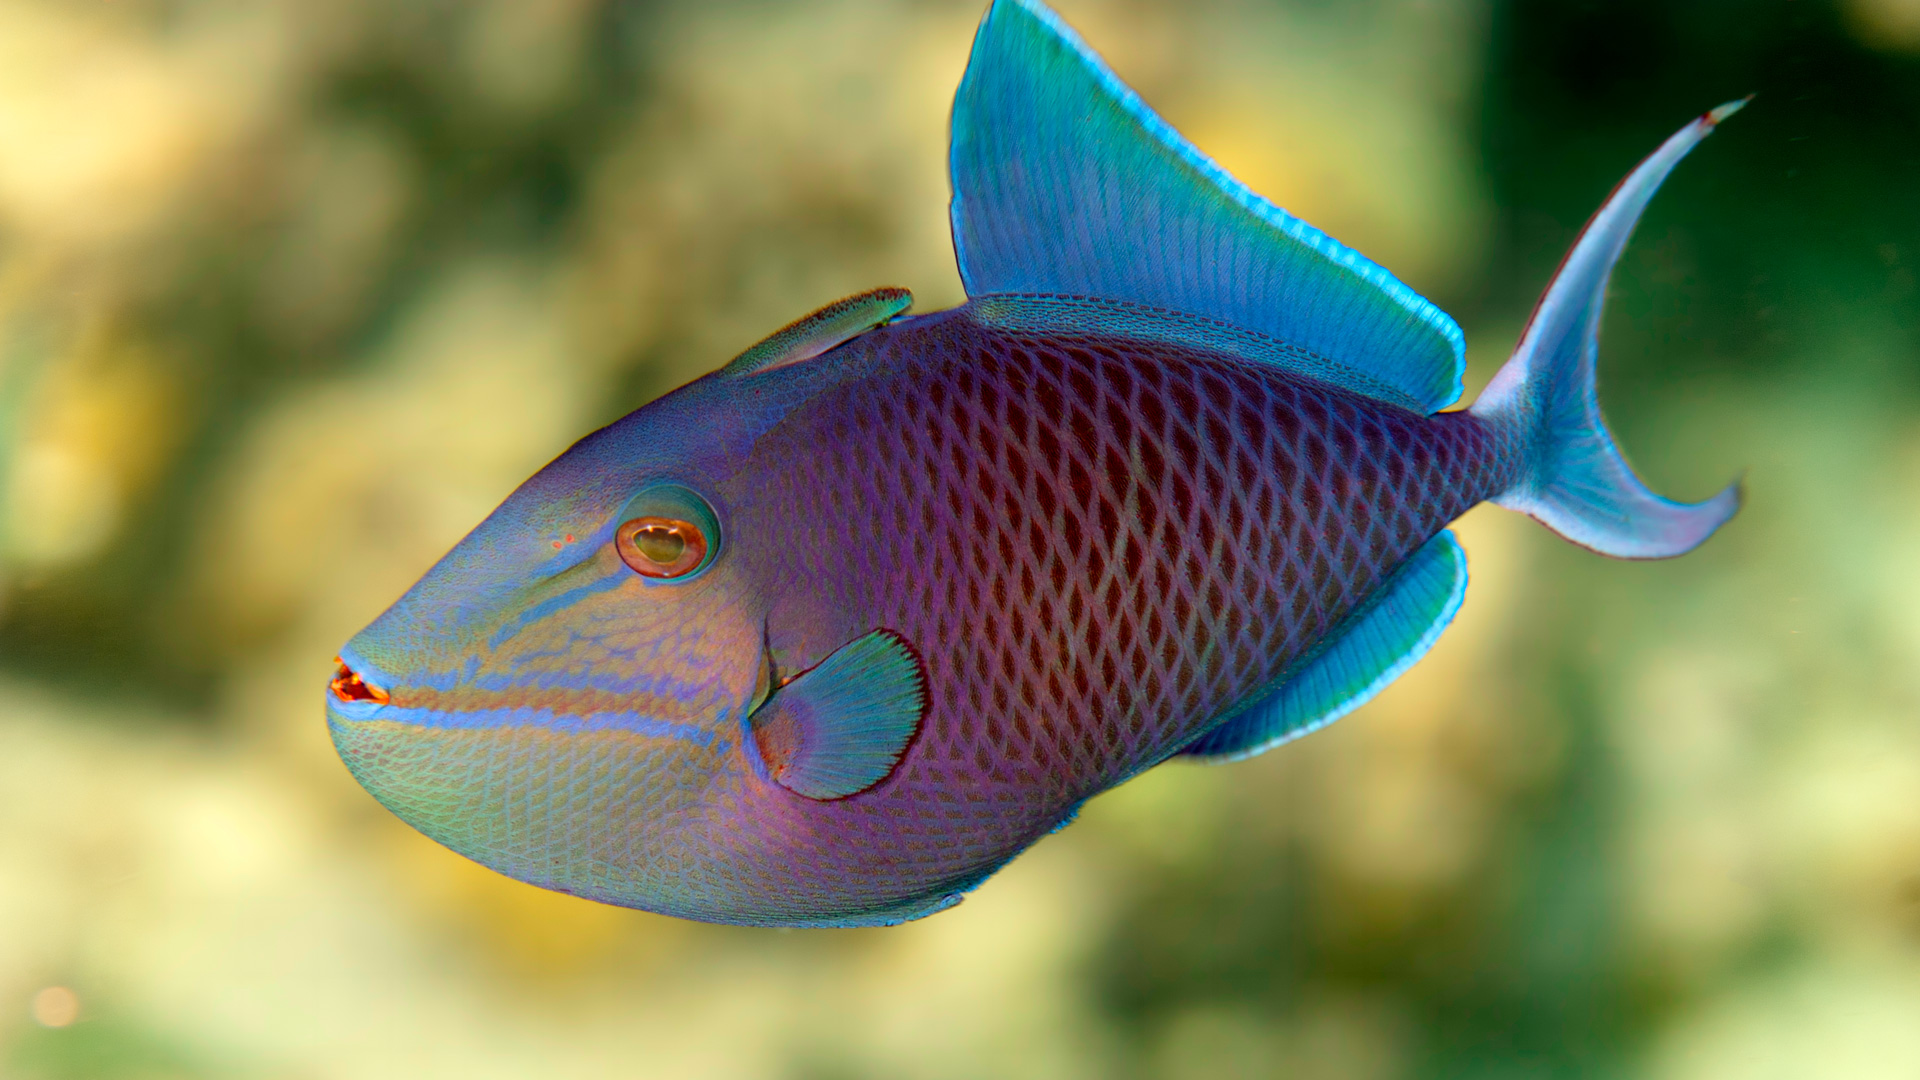 Red-toothed triggerfish